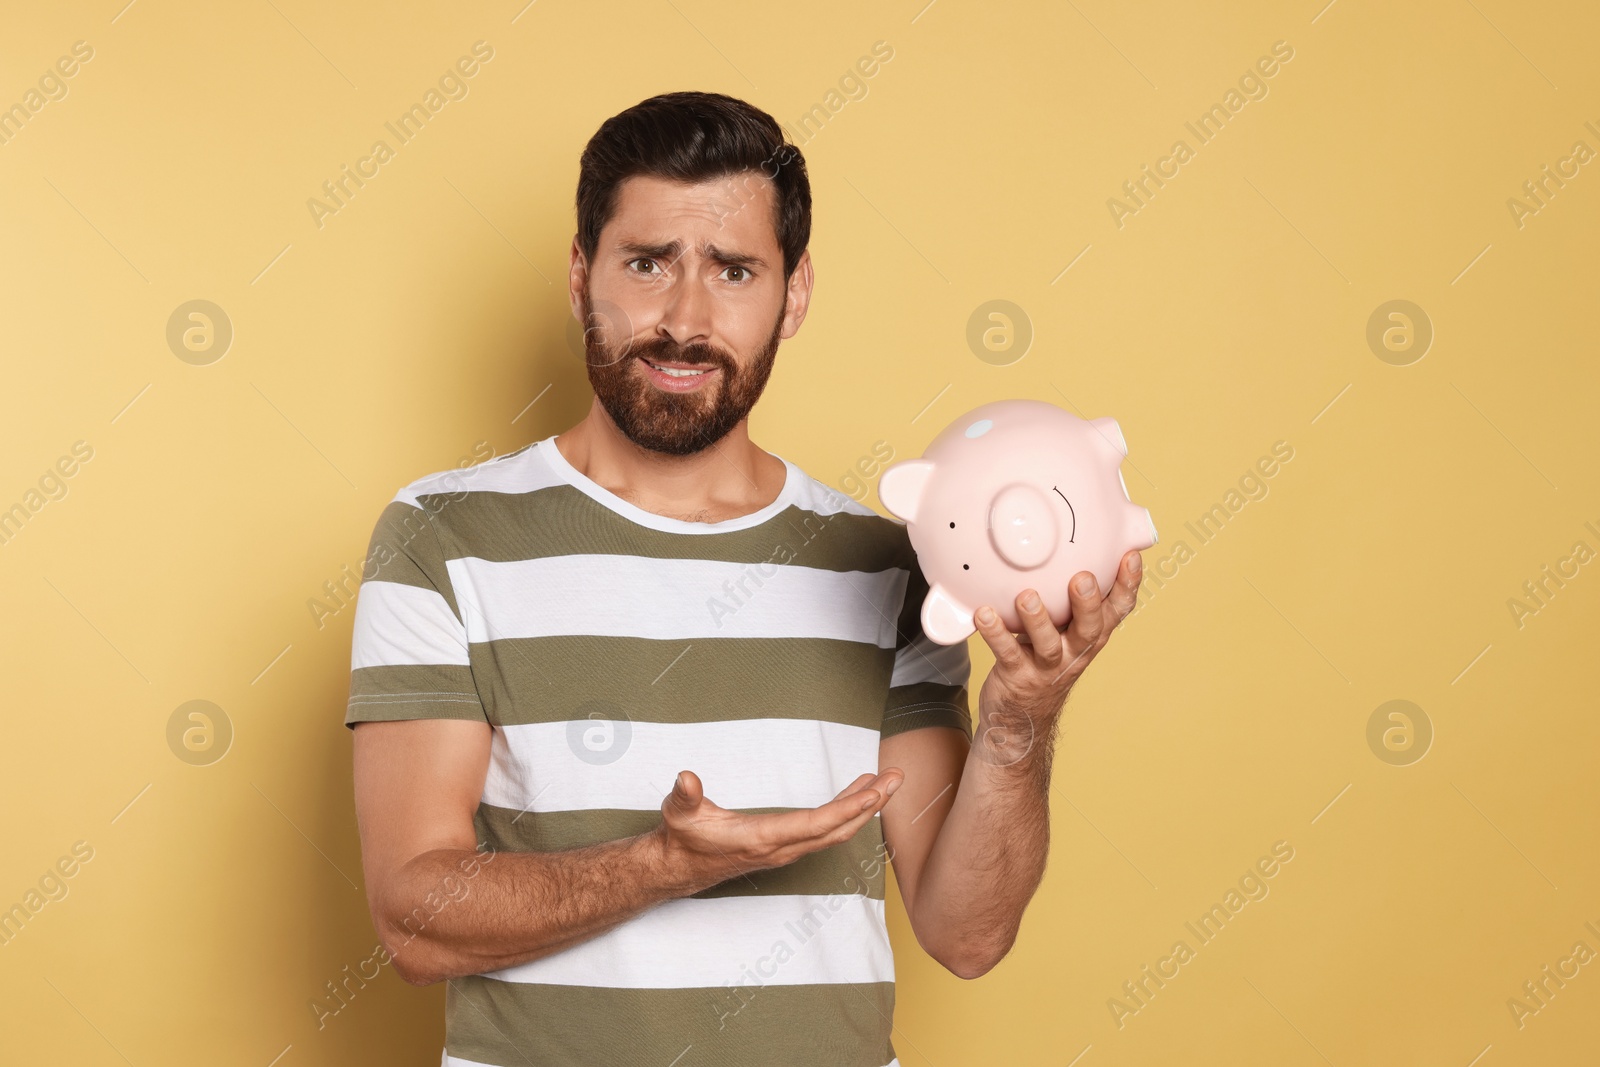 Photo of Man with ceramic piggy bank on beige background